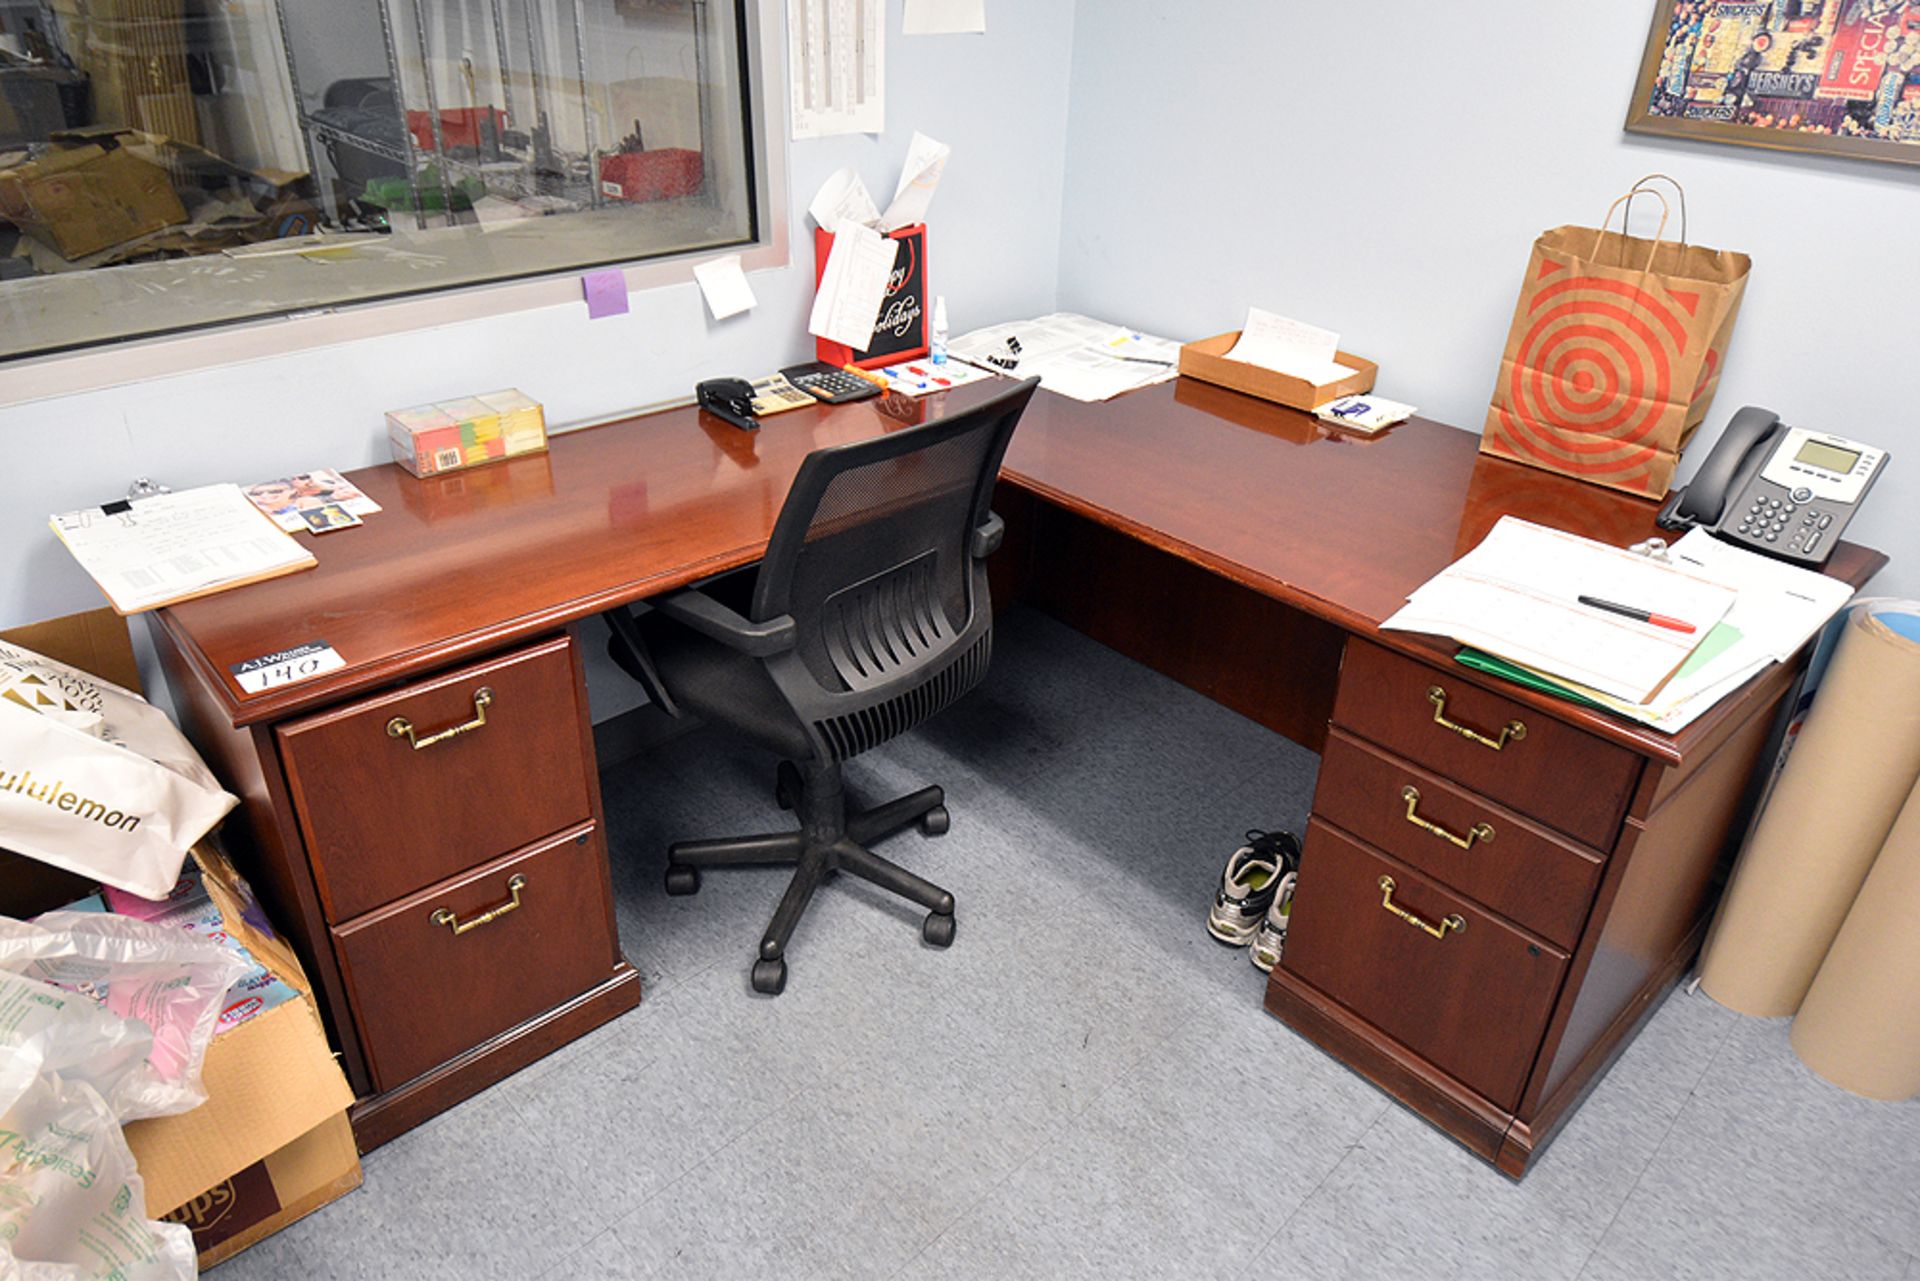 L-Shaped Desk (72"x77"x29"H) w/ Swivel Arm Chair and (1) 4-Draw File Cabinet (75" x 21"x29"H)